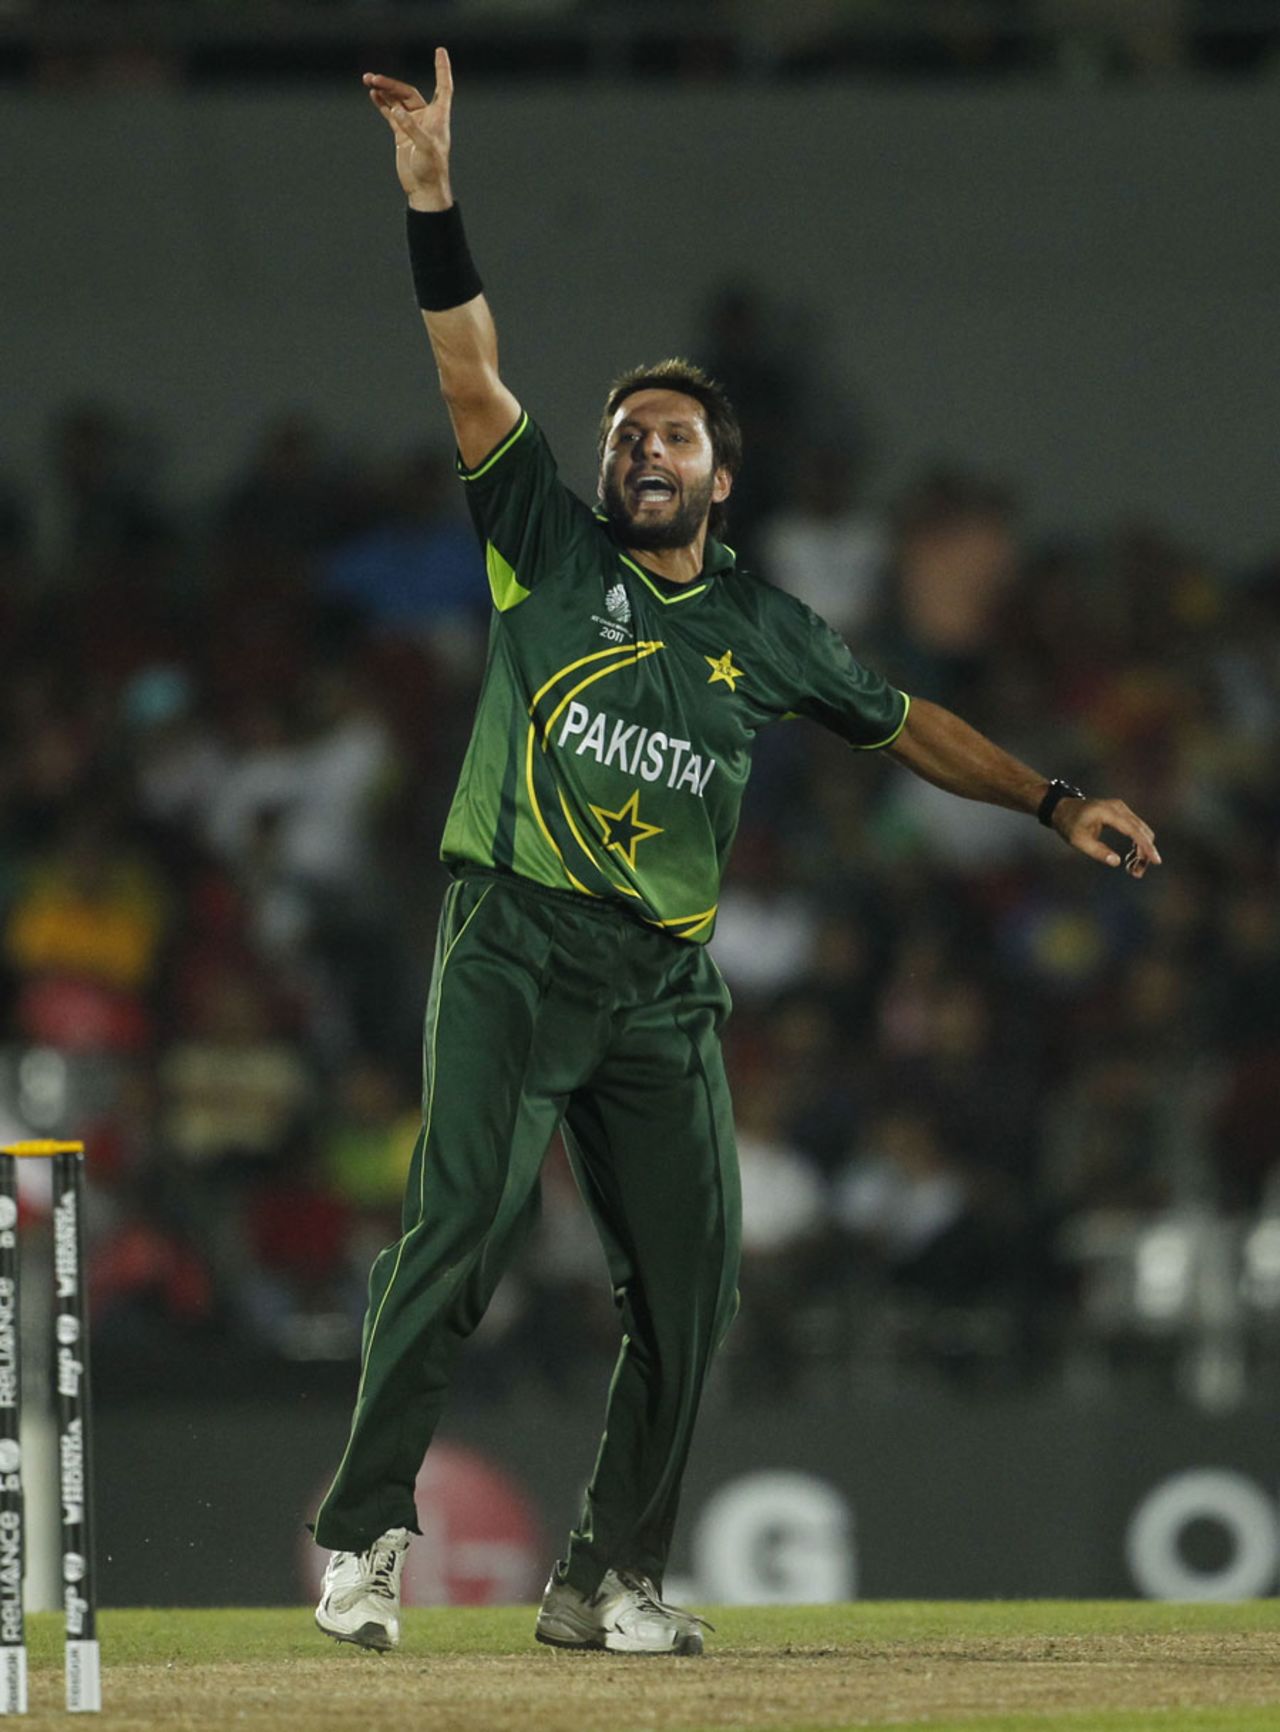 Shahid Afridi made several appeals for lbw during his 5 for 16 spell, Kenya v Pakistan, World Cup, Group A, Hambantota, February 23, 2011